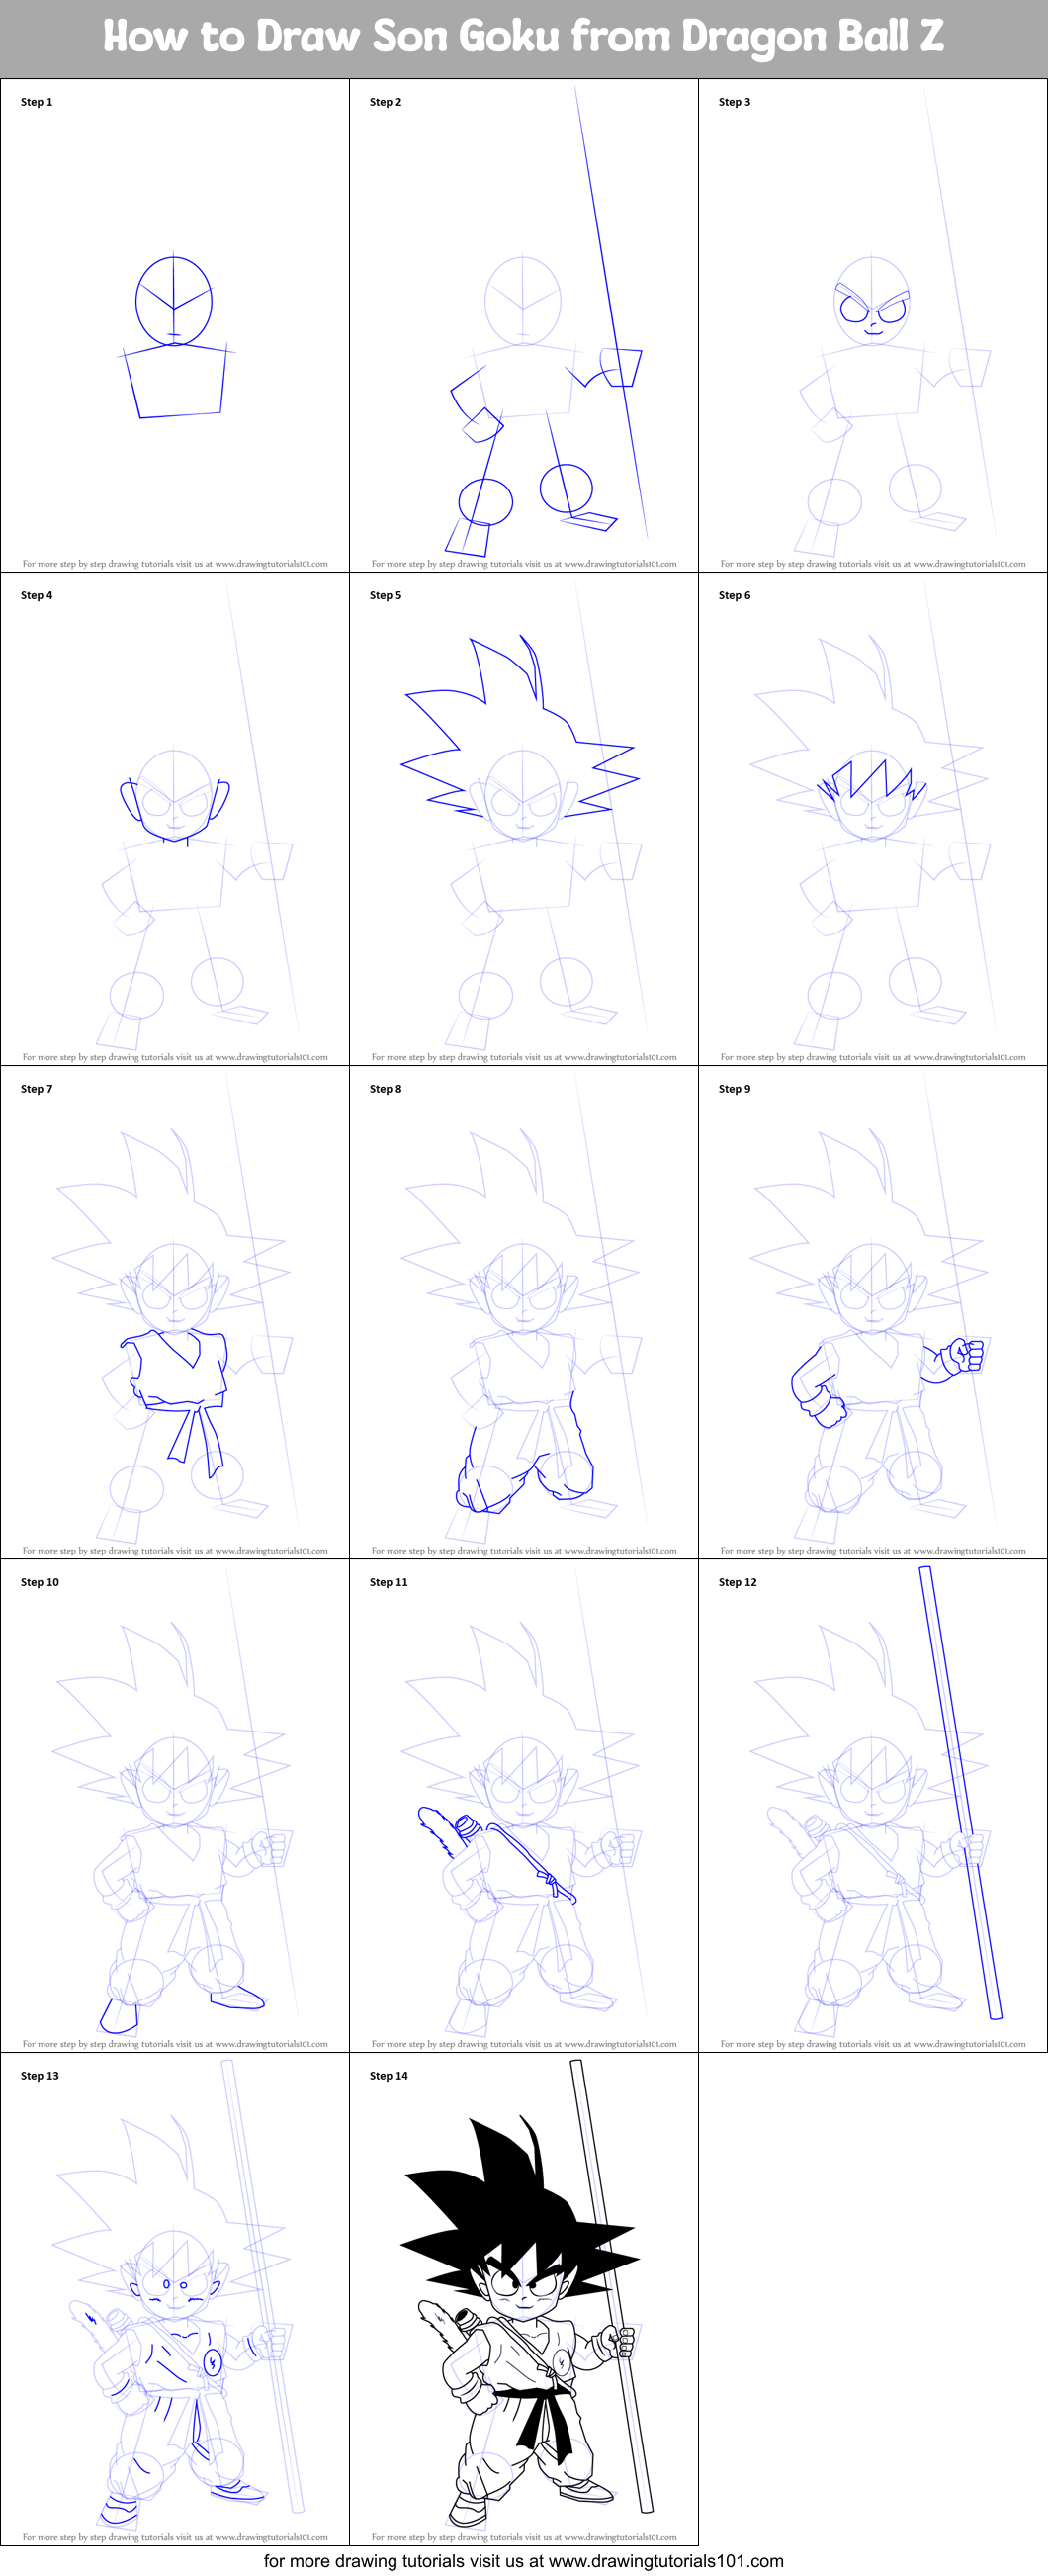 How to Draw Son Goku from Dragon Ball Z printable step by step drawing